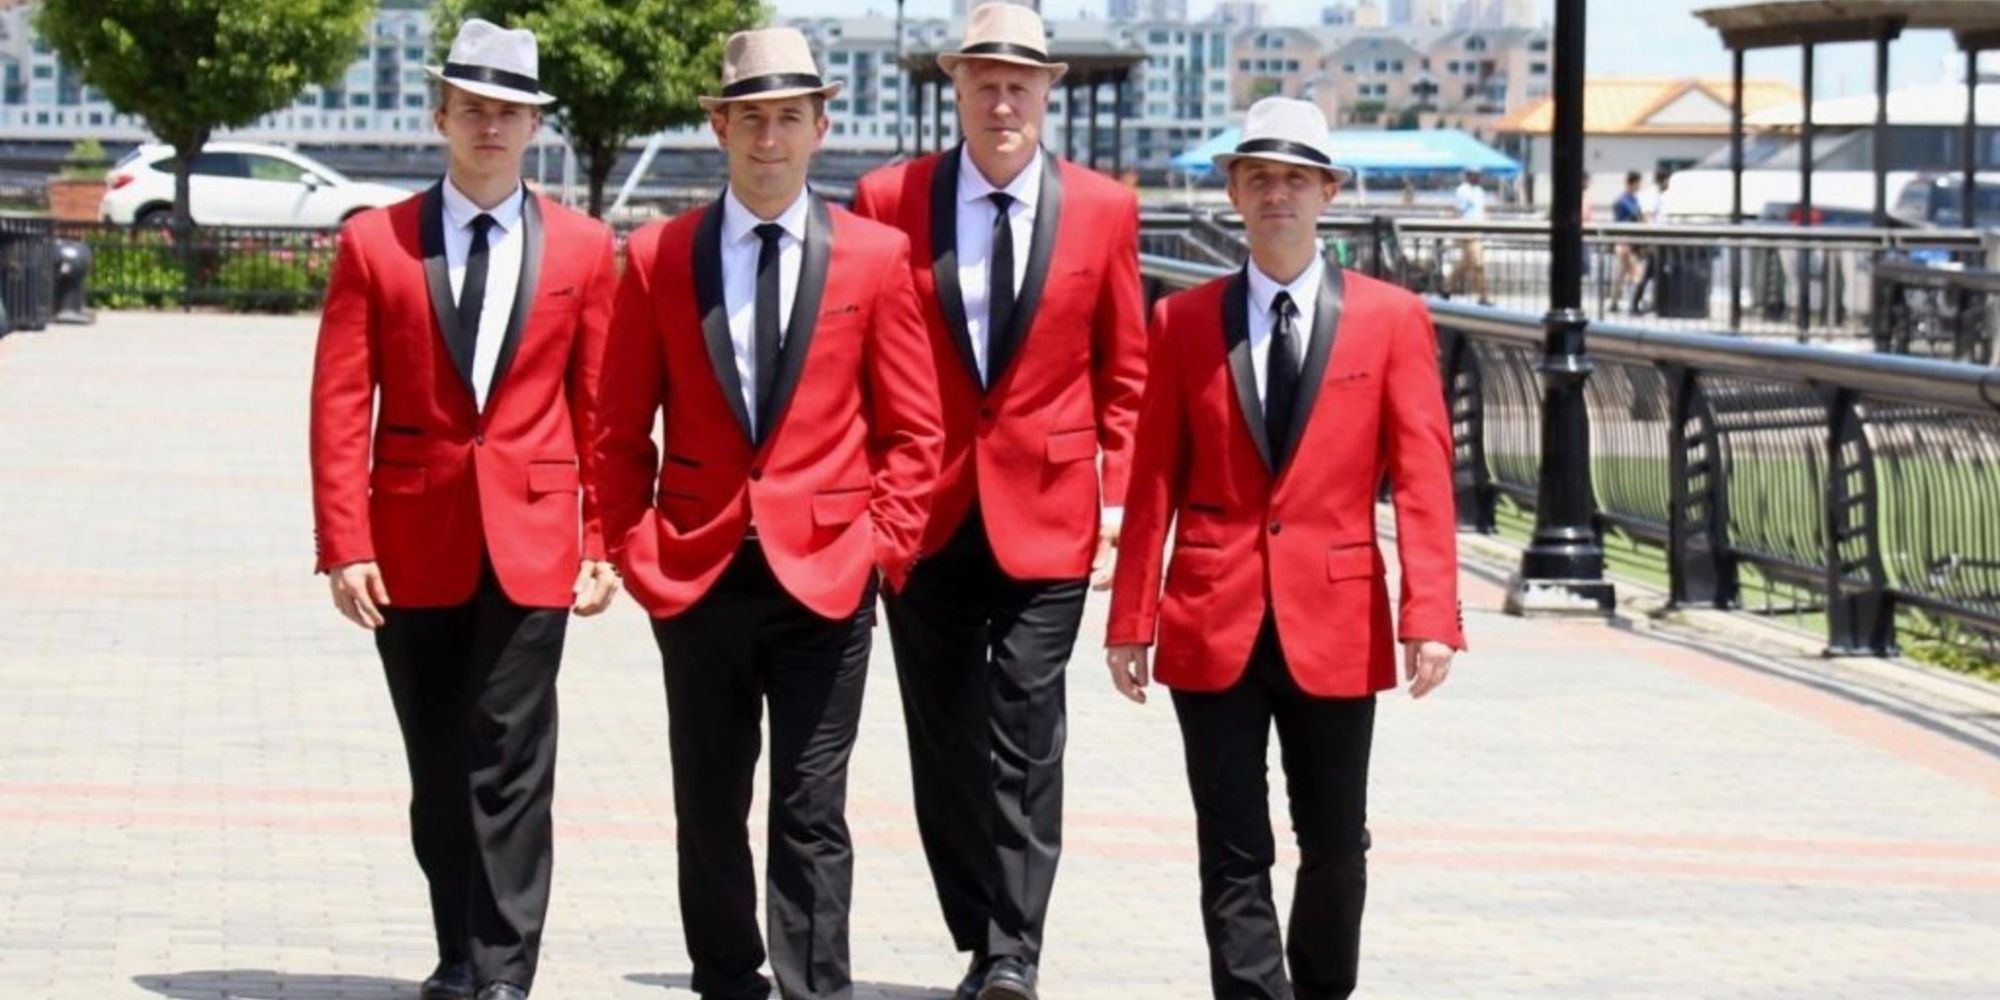 The Jersey Tenors LIVE at The Tin Pan promotional image